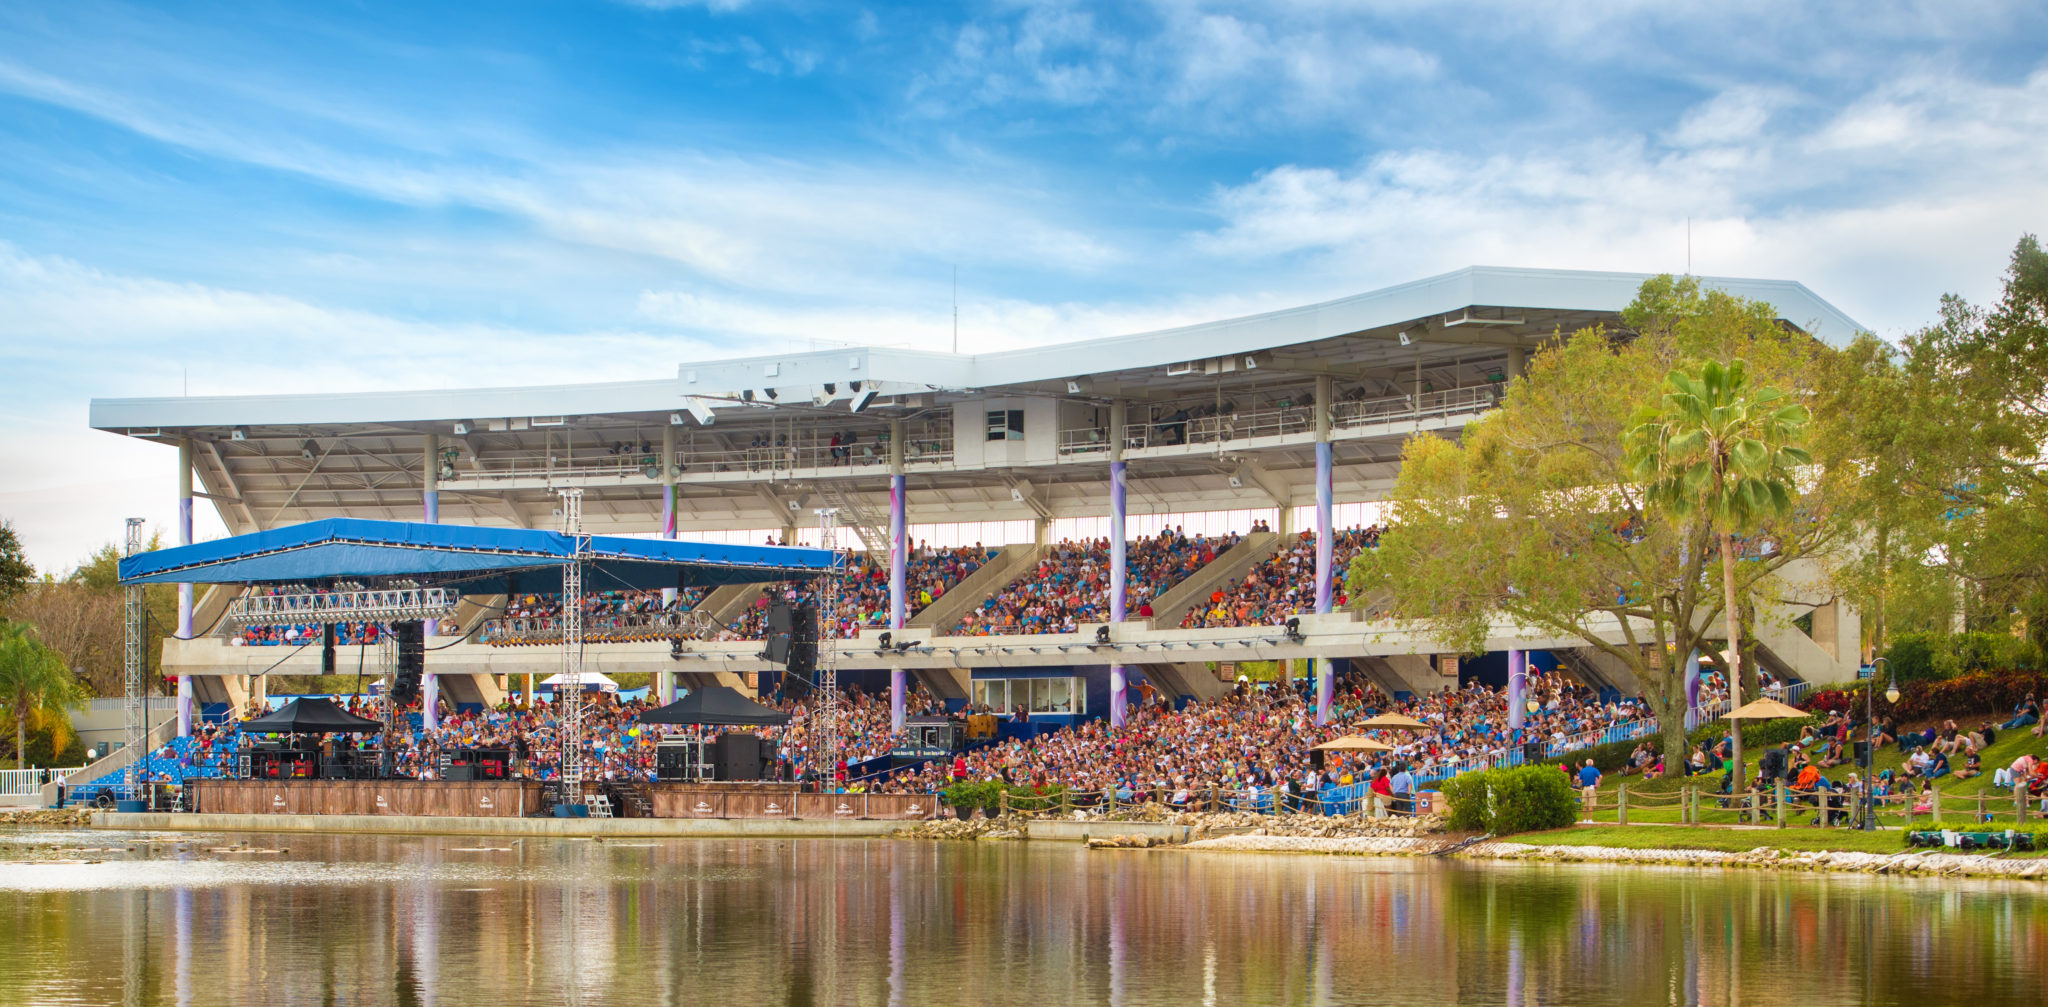 SeaWorld Has Announced Additional Musical Artists for the Seven Seas Food Festival